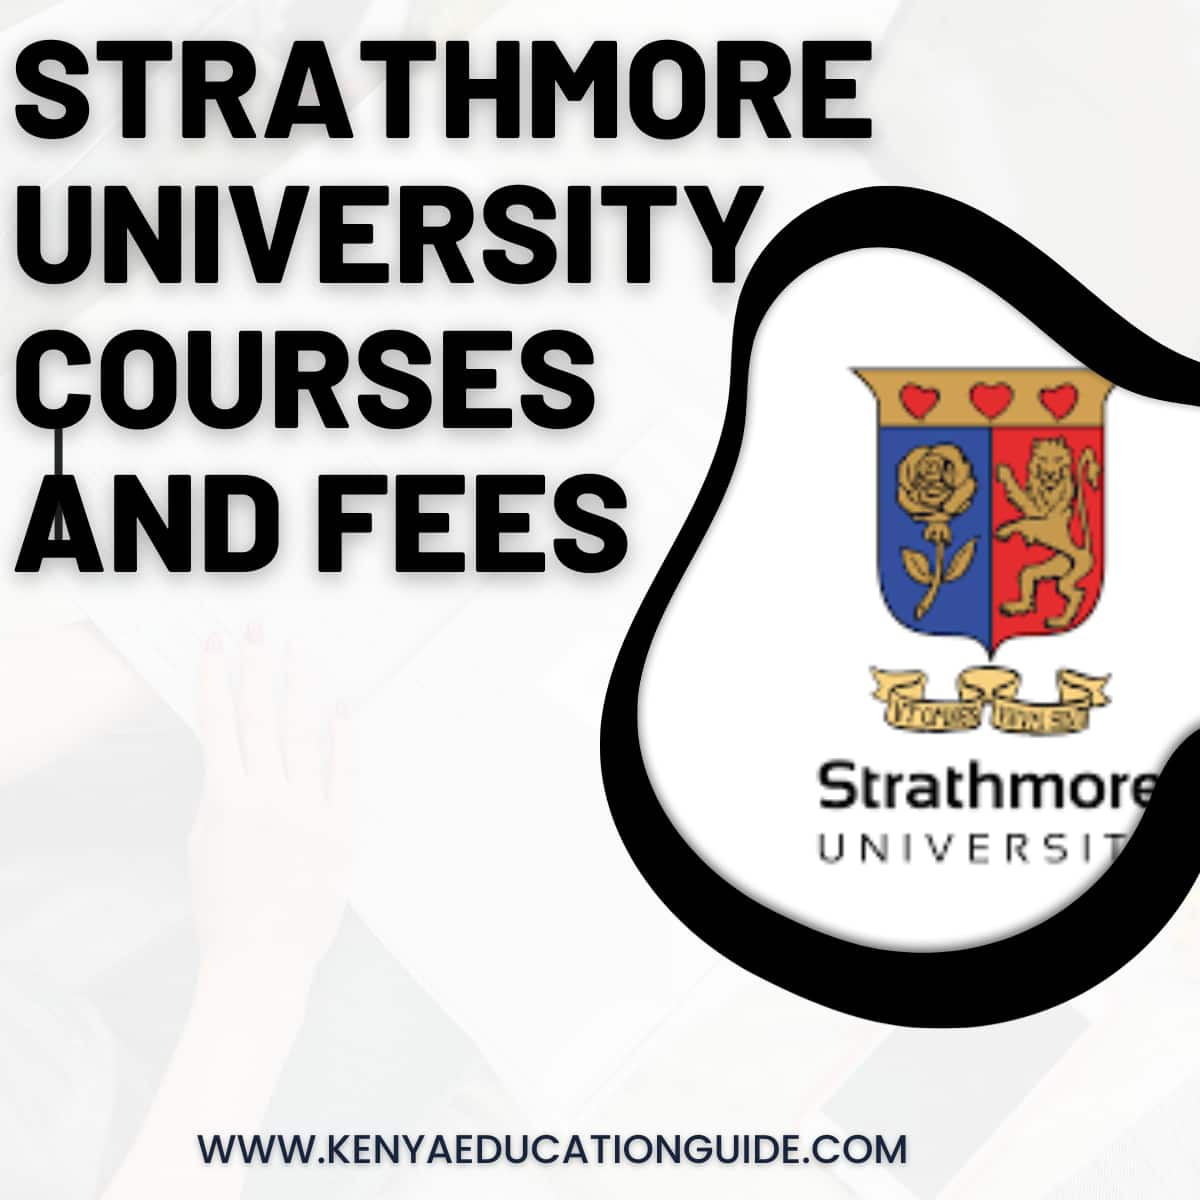 Strathmore University Courses and Fees